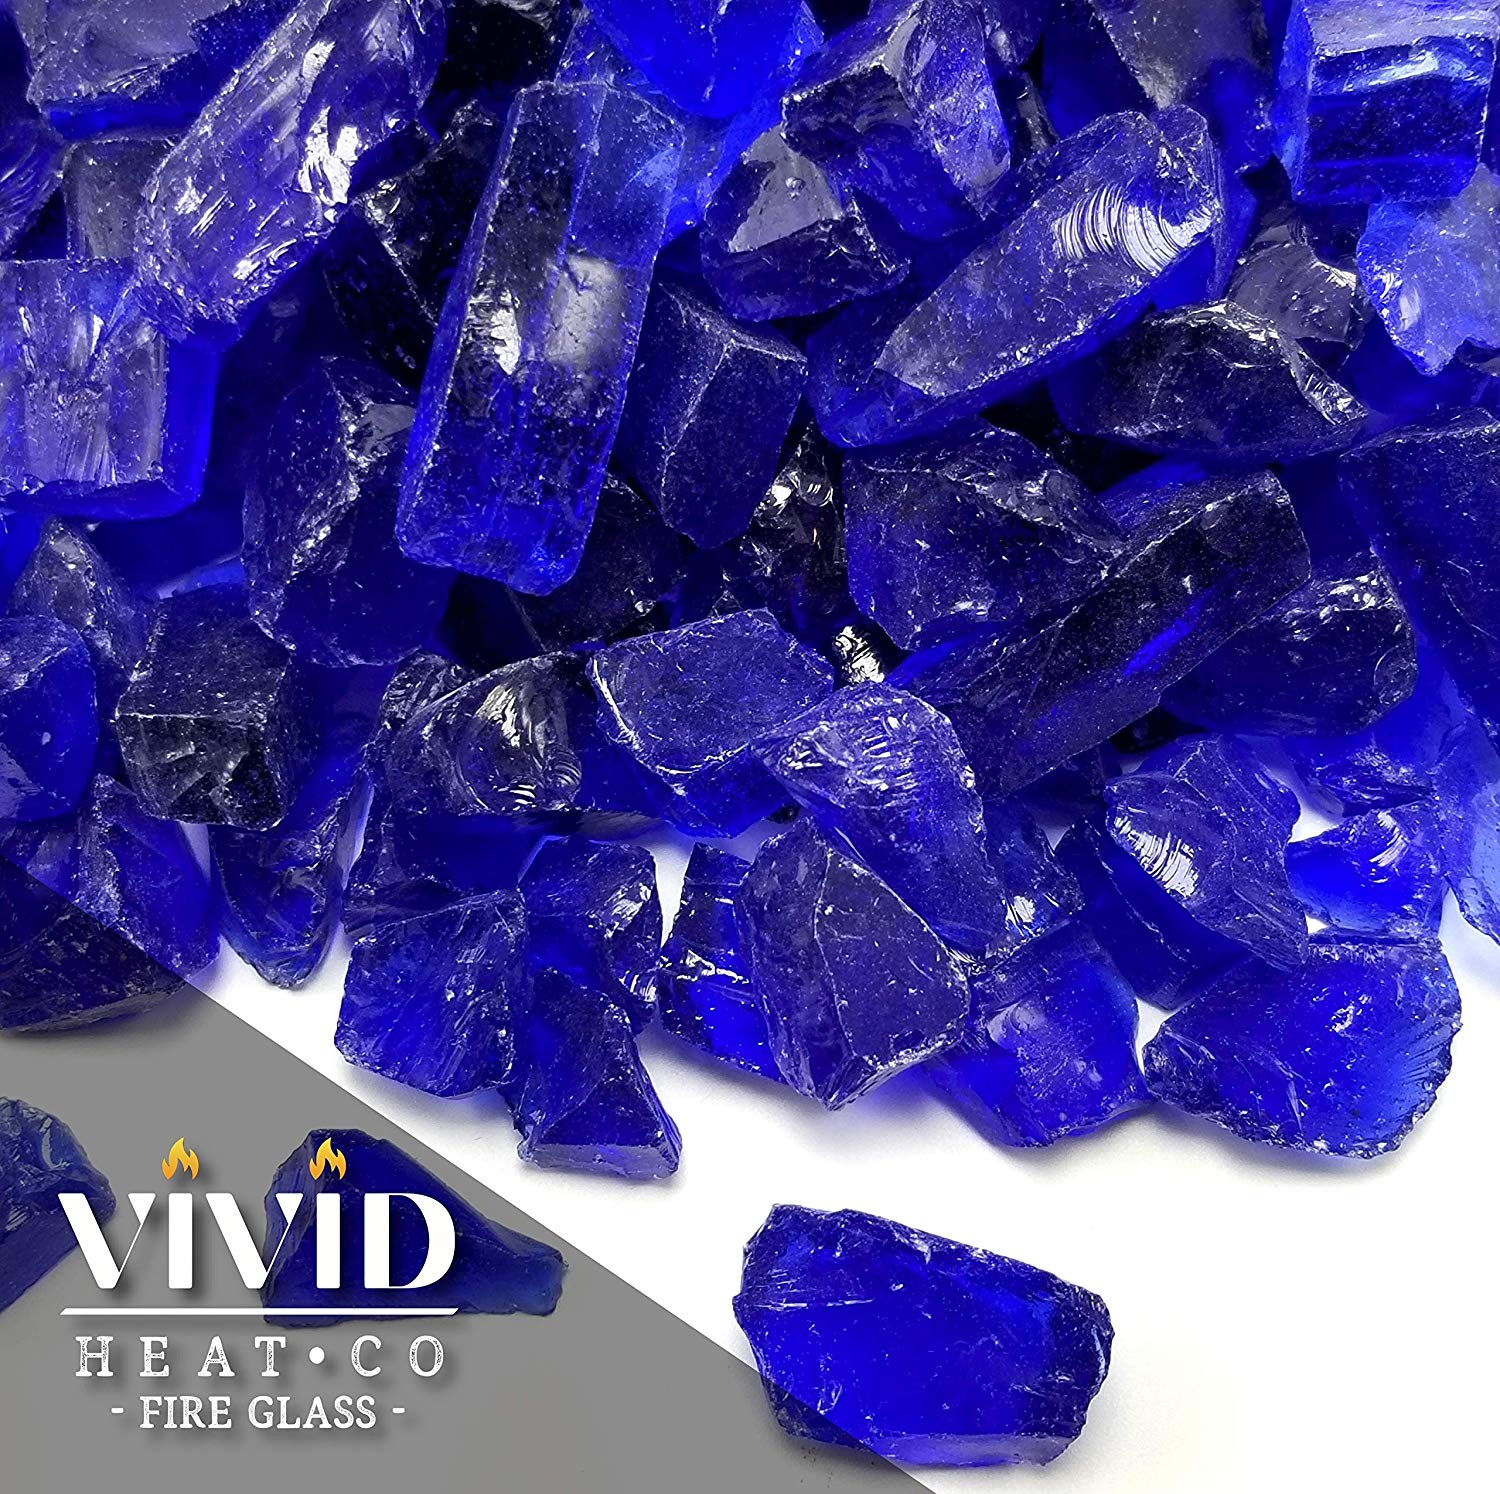 Cobalt Blue 1/2" - 3/4" Large Premium Fire Glass for Fireplace and Fire Pit